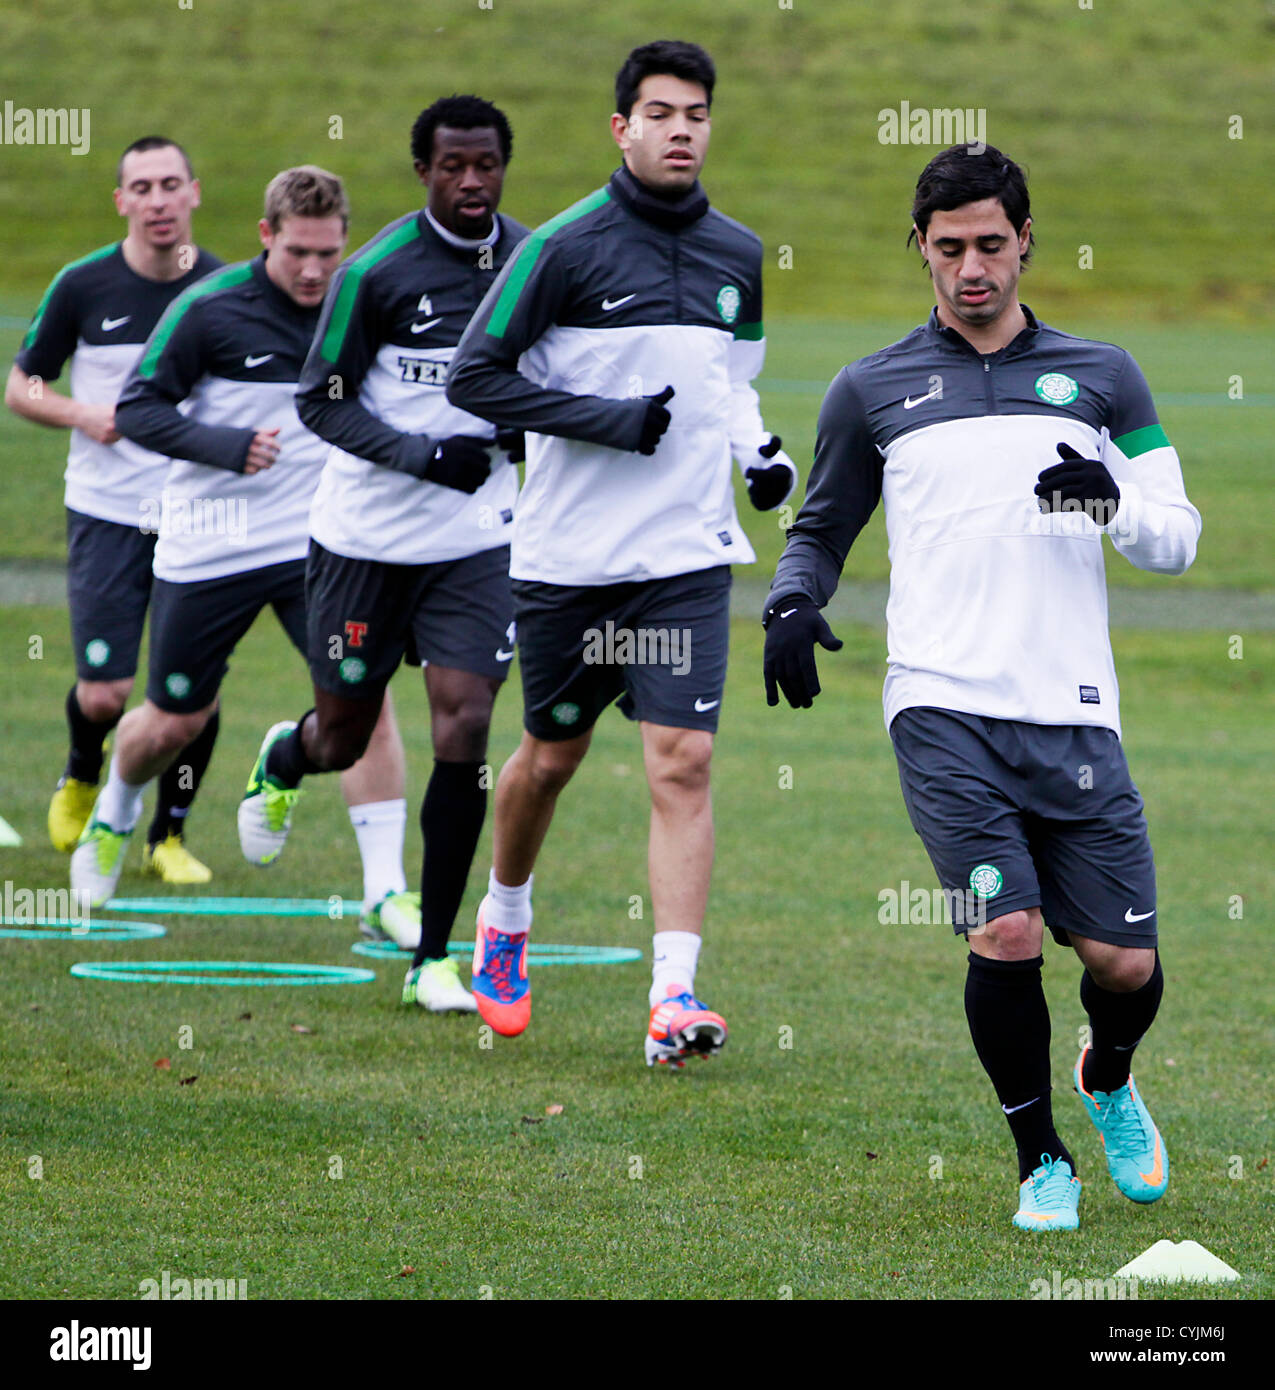 06.11.2012 Lennoxtown, Scotland. Beram Kayal, Miku, Efe Ambrose, Kris Commons and Scott Brown during the Celtic Training session ahead of their game with Barcelona on Wednesday. Stock Photo